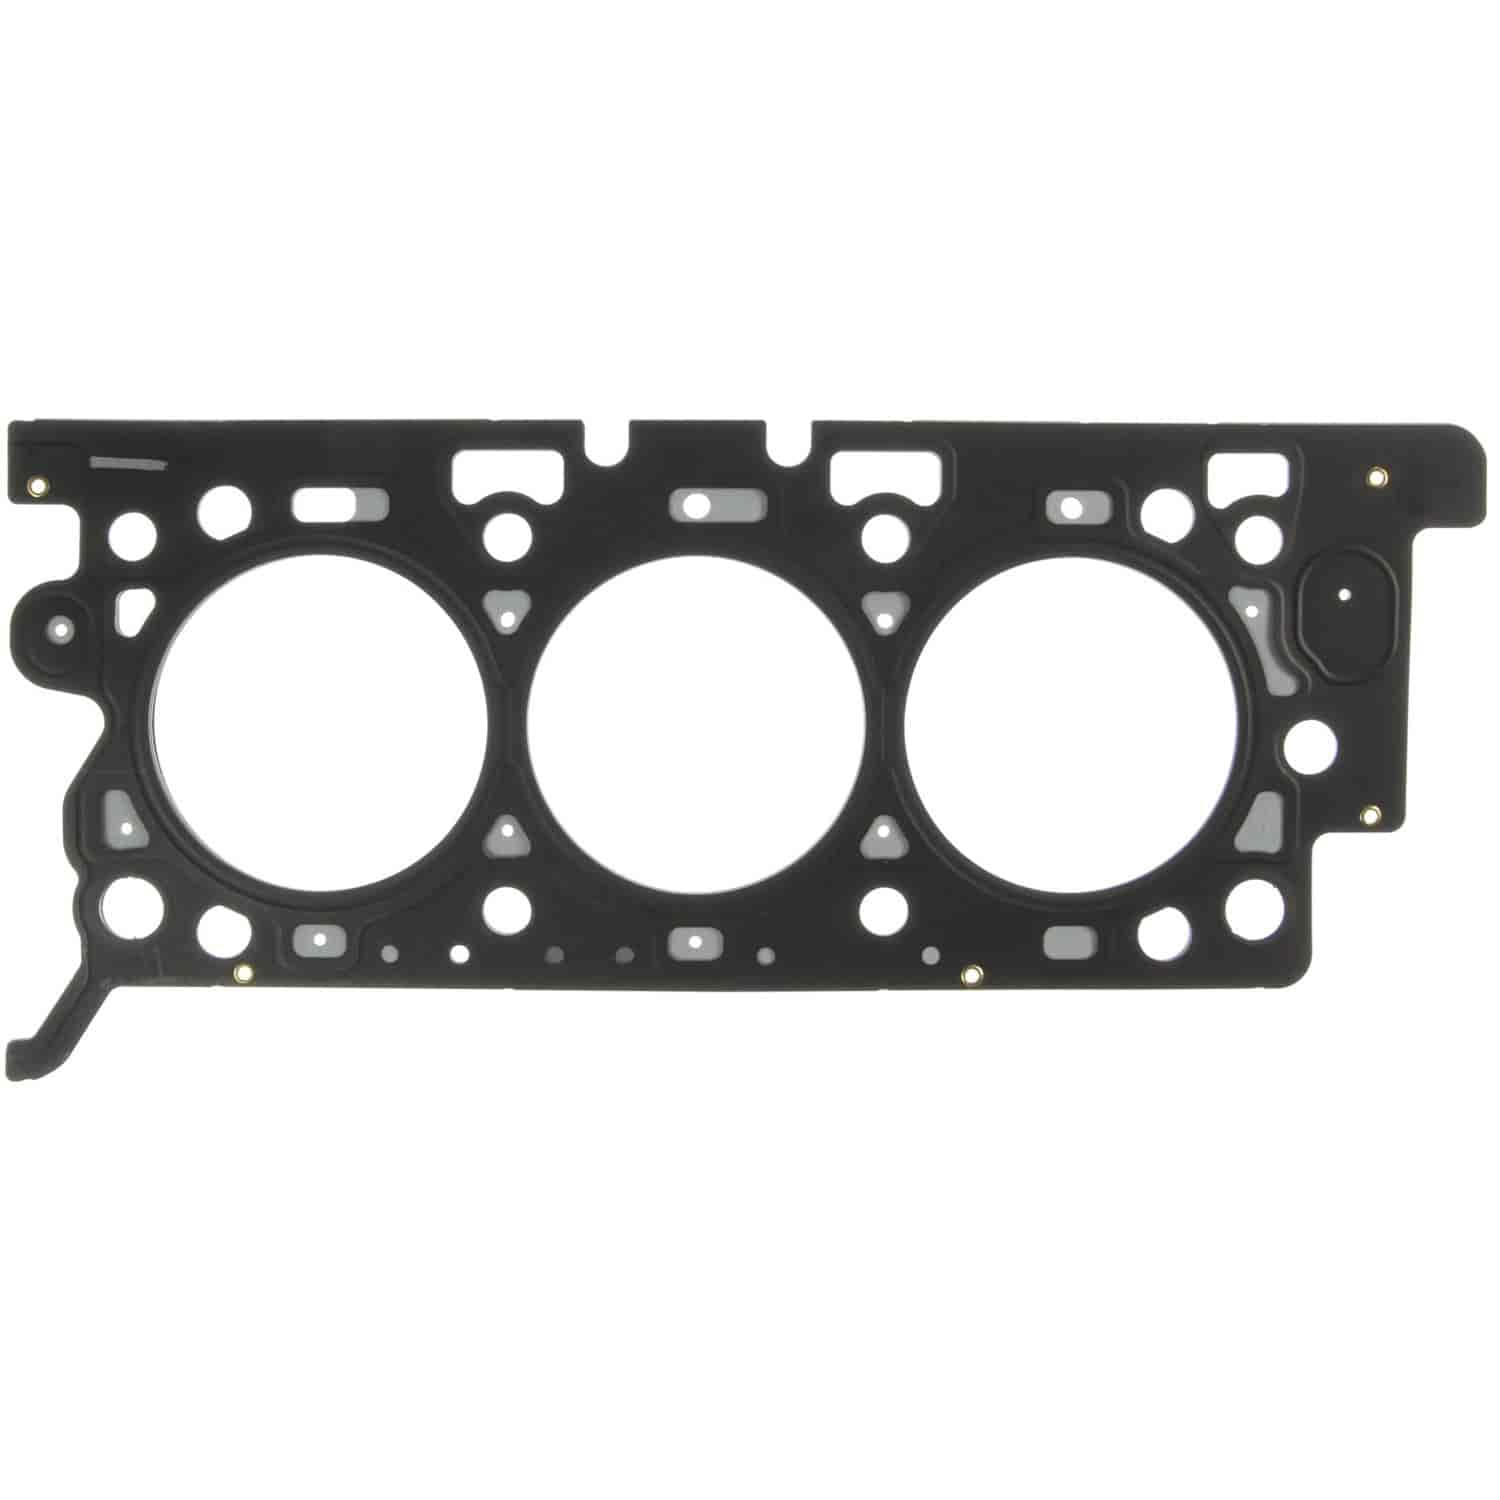 Cylinder Head Gasket Right Ford Duratec Eng. 3.0L V6 DOHC Taurus & Sable 1996-2002. Right Side